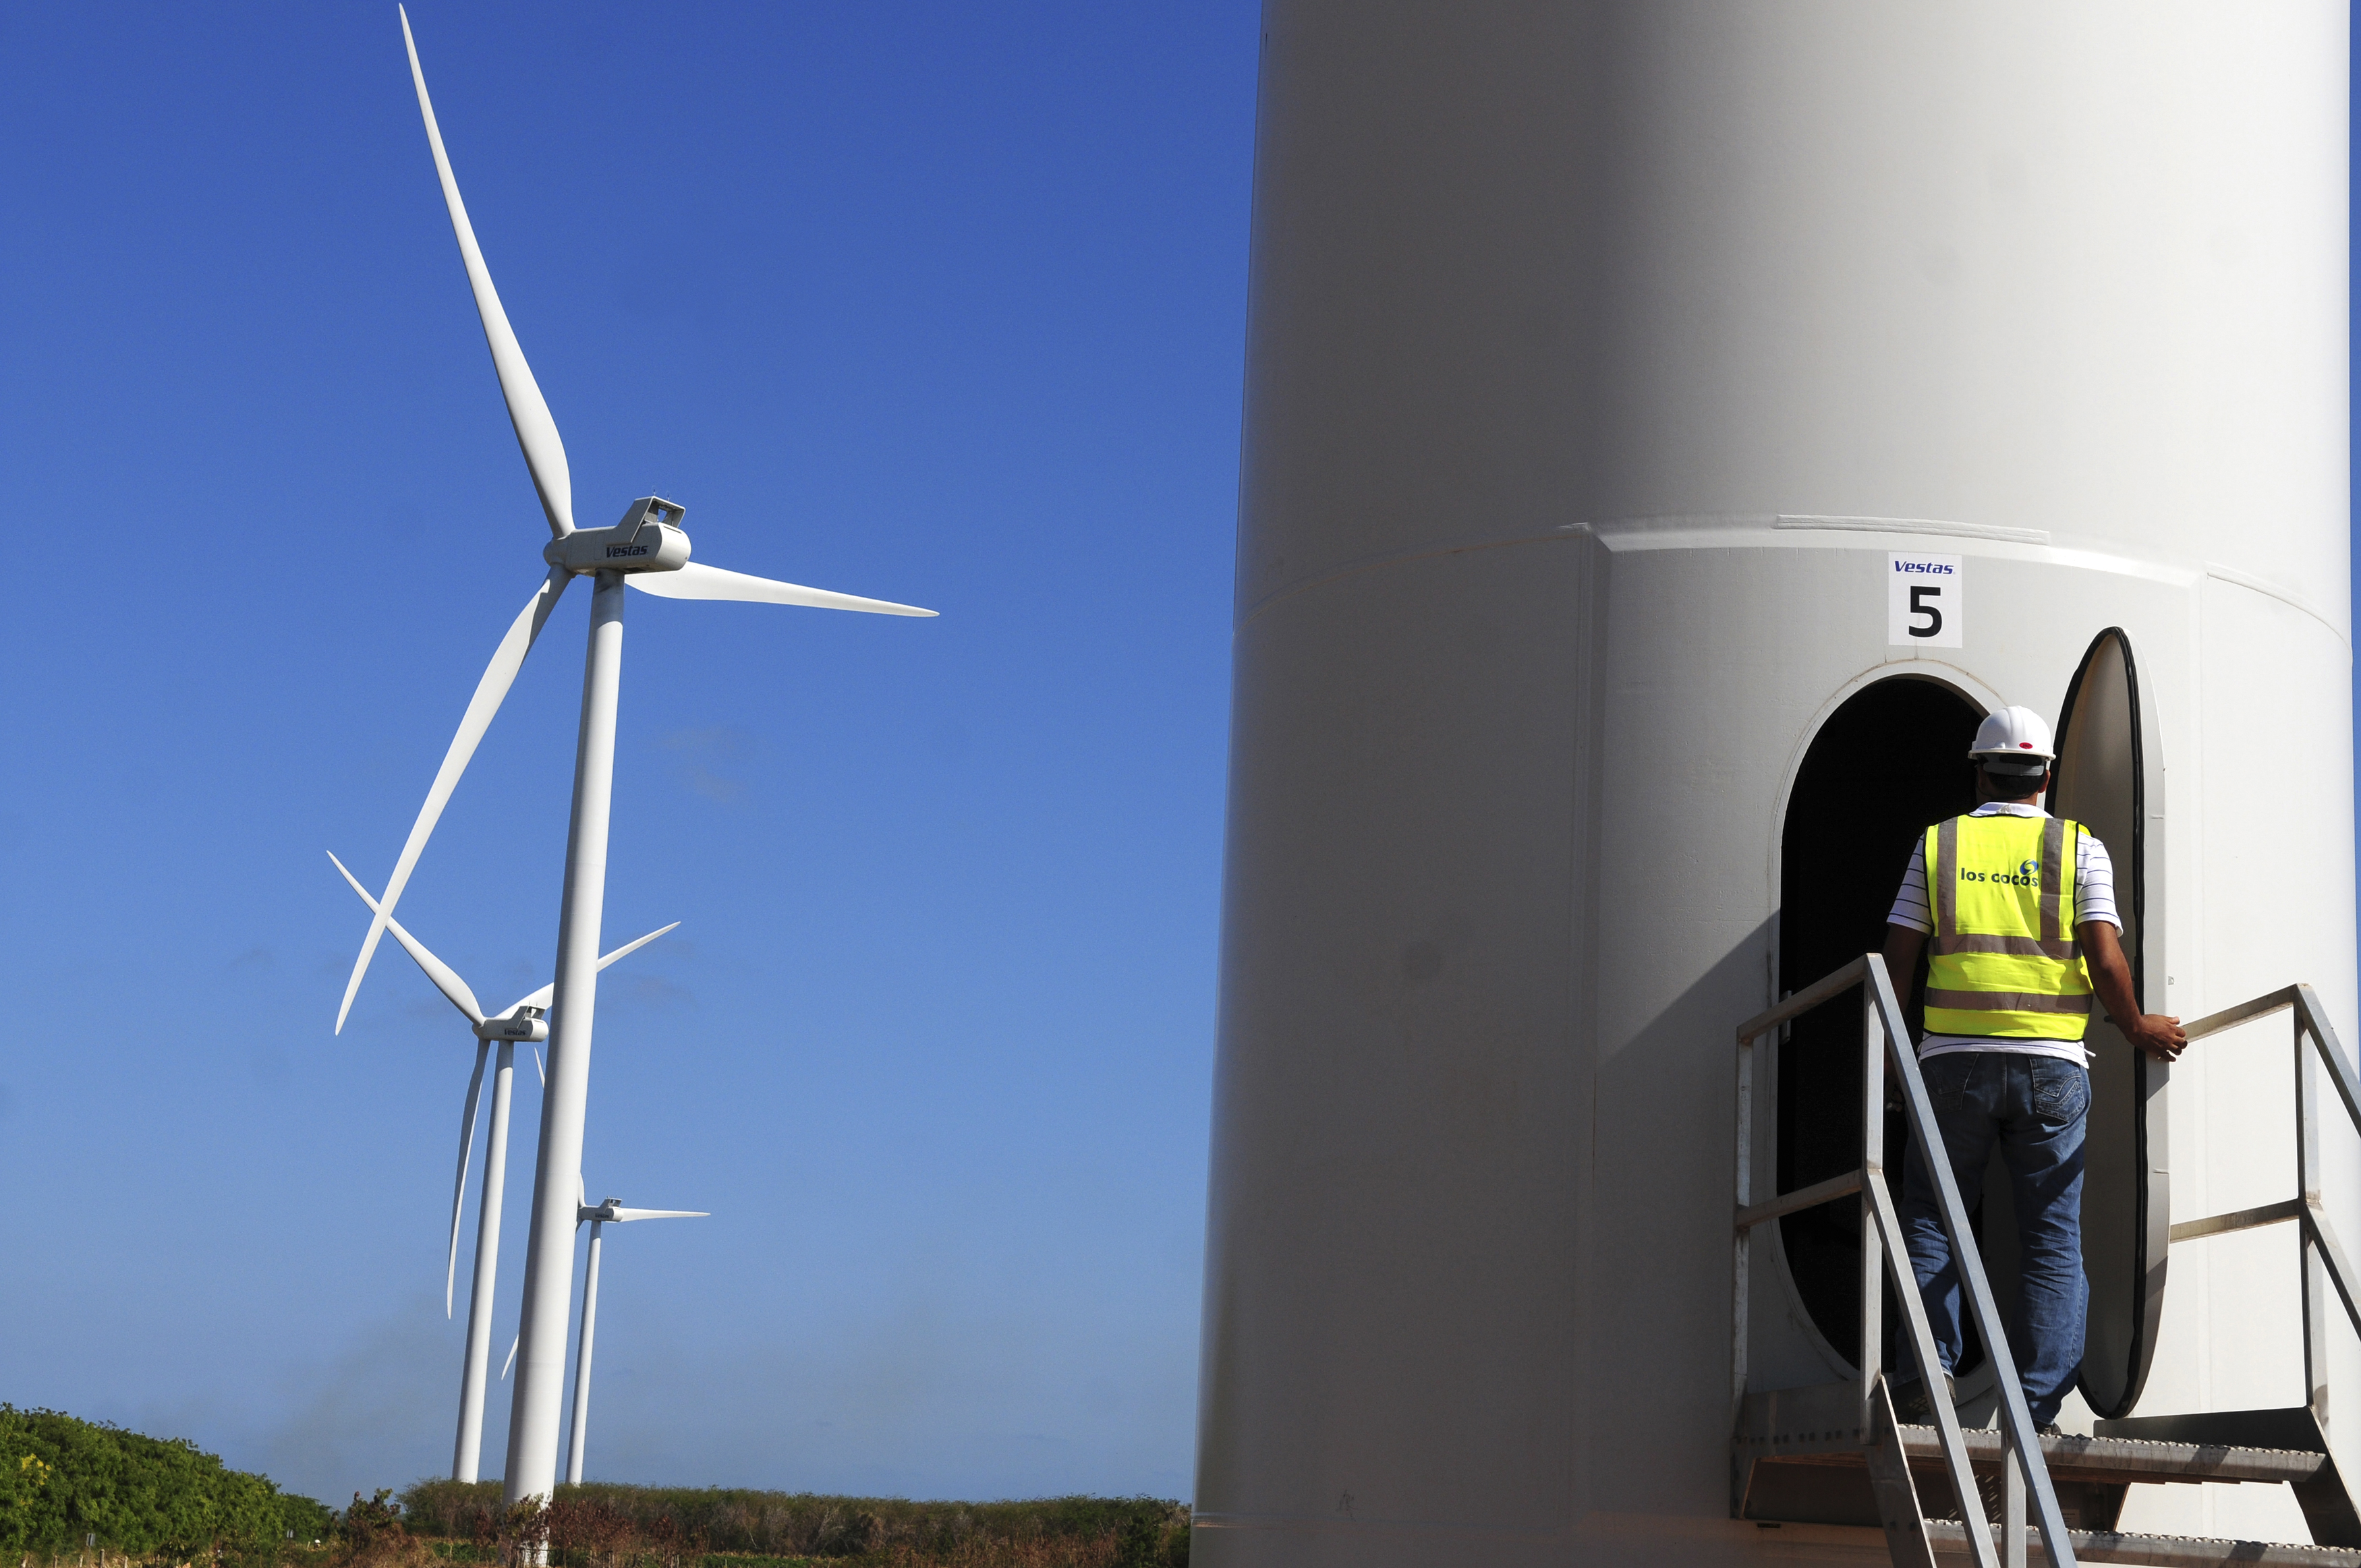 An employee works at the Los Cocos wind farm in Juancho Pedernales